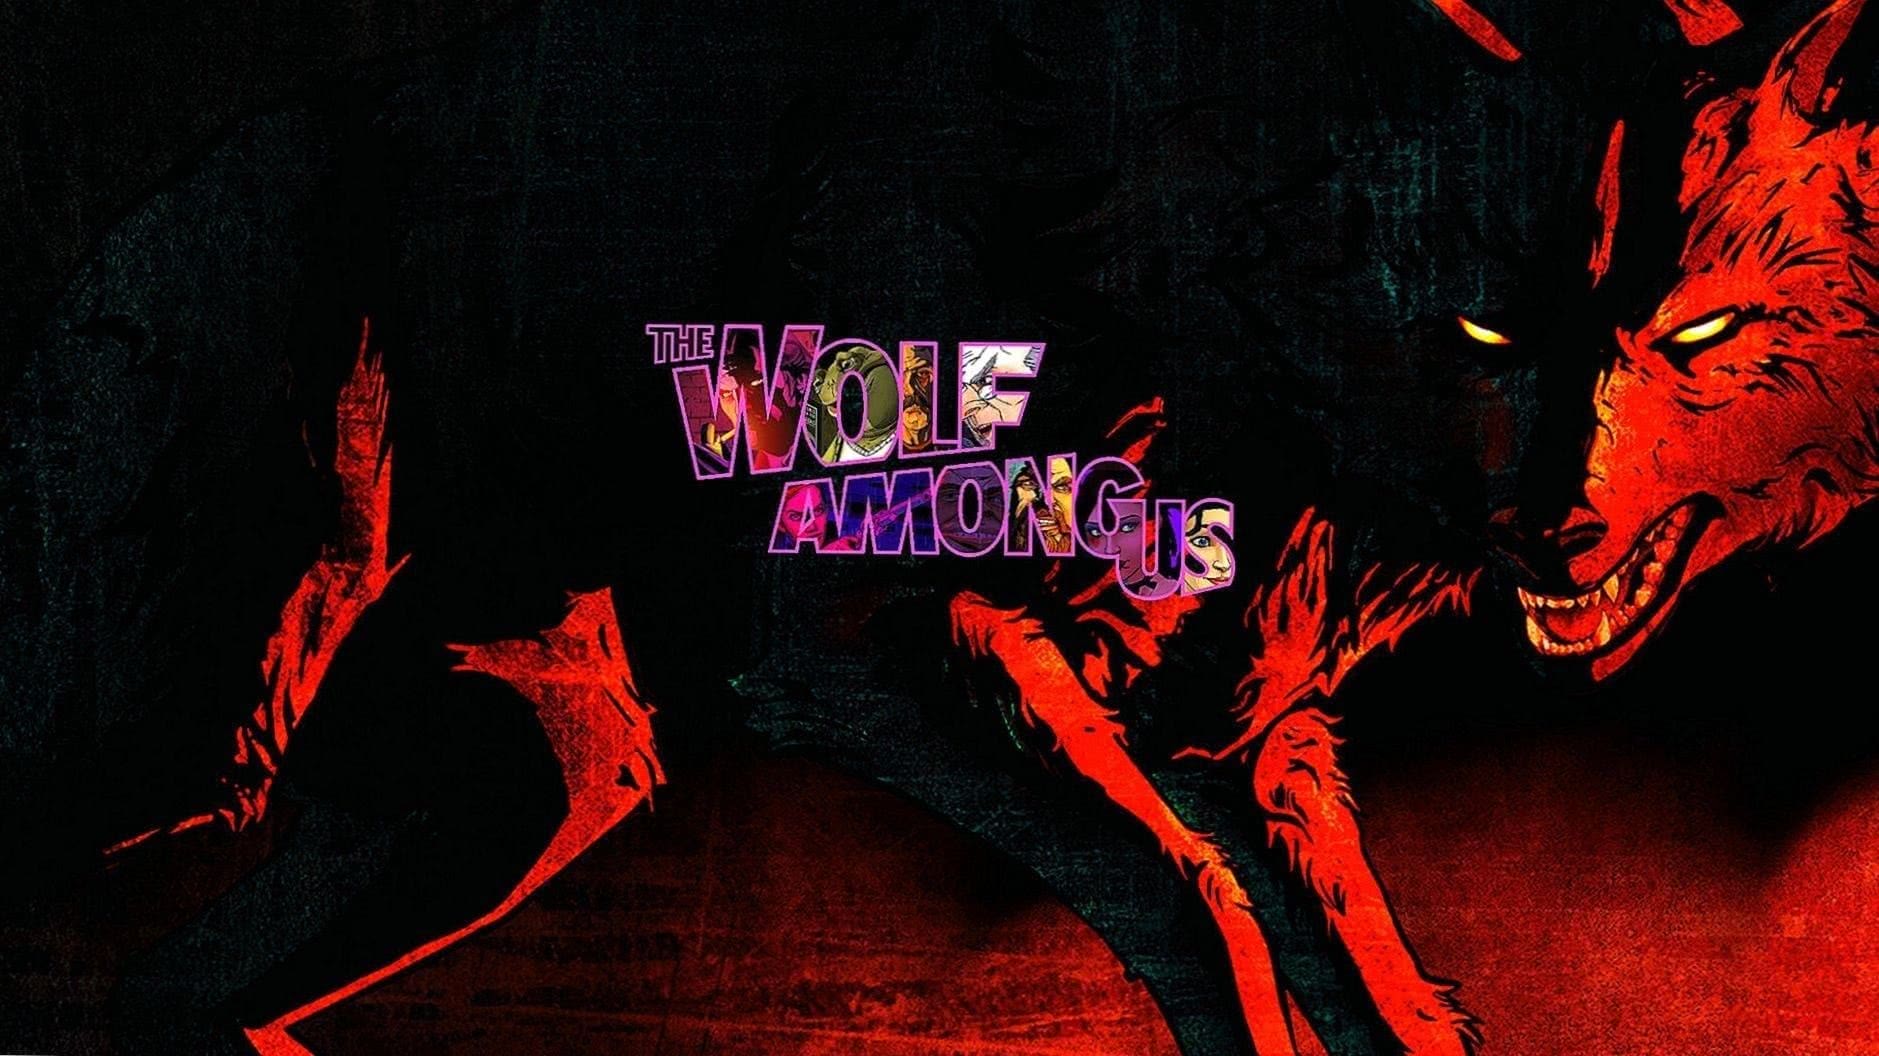 The Wolf Among Us Wallpapers 1920×1080